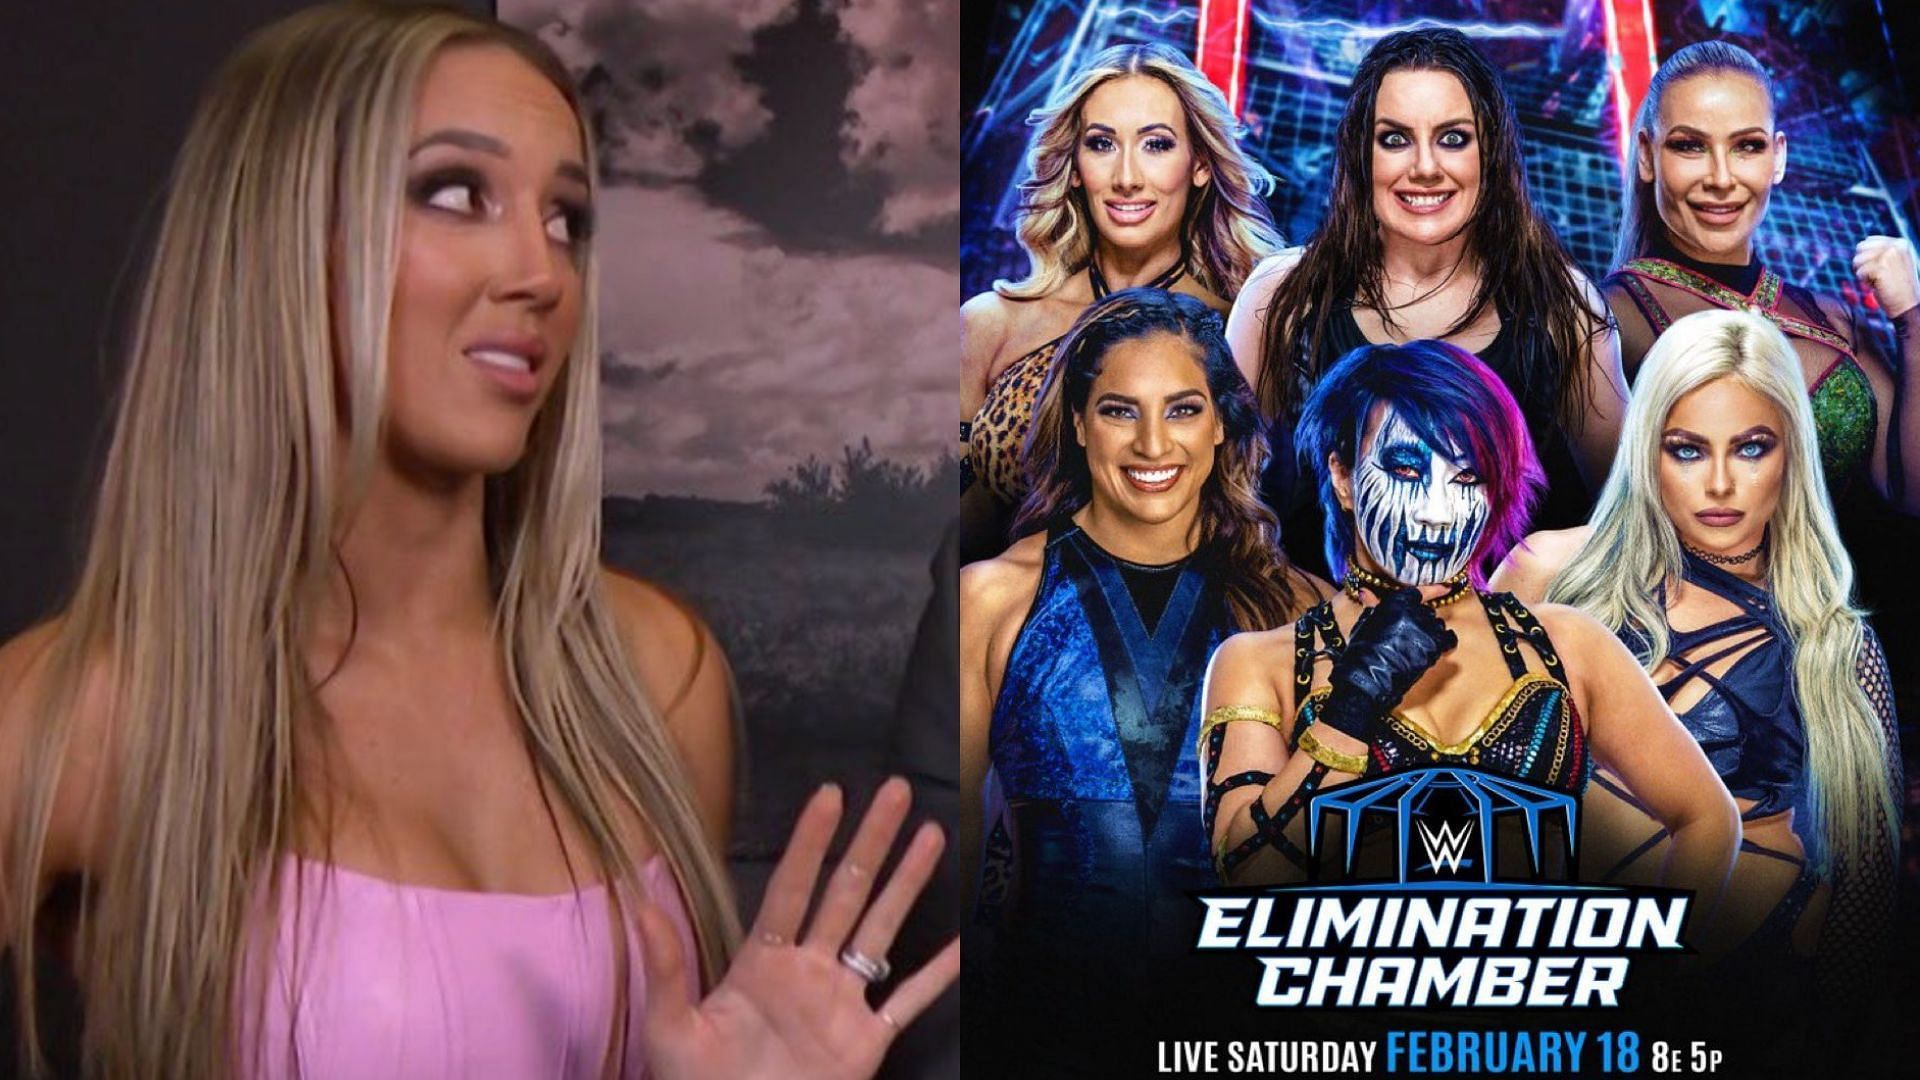 Chelsea Green is not currently booked for a match at WWE Elimination Chamber.